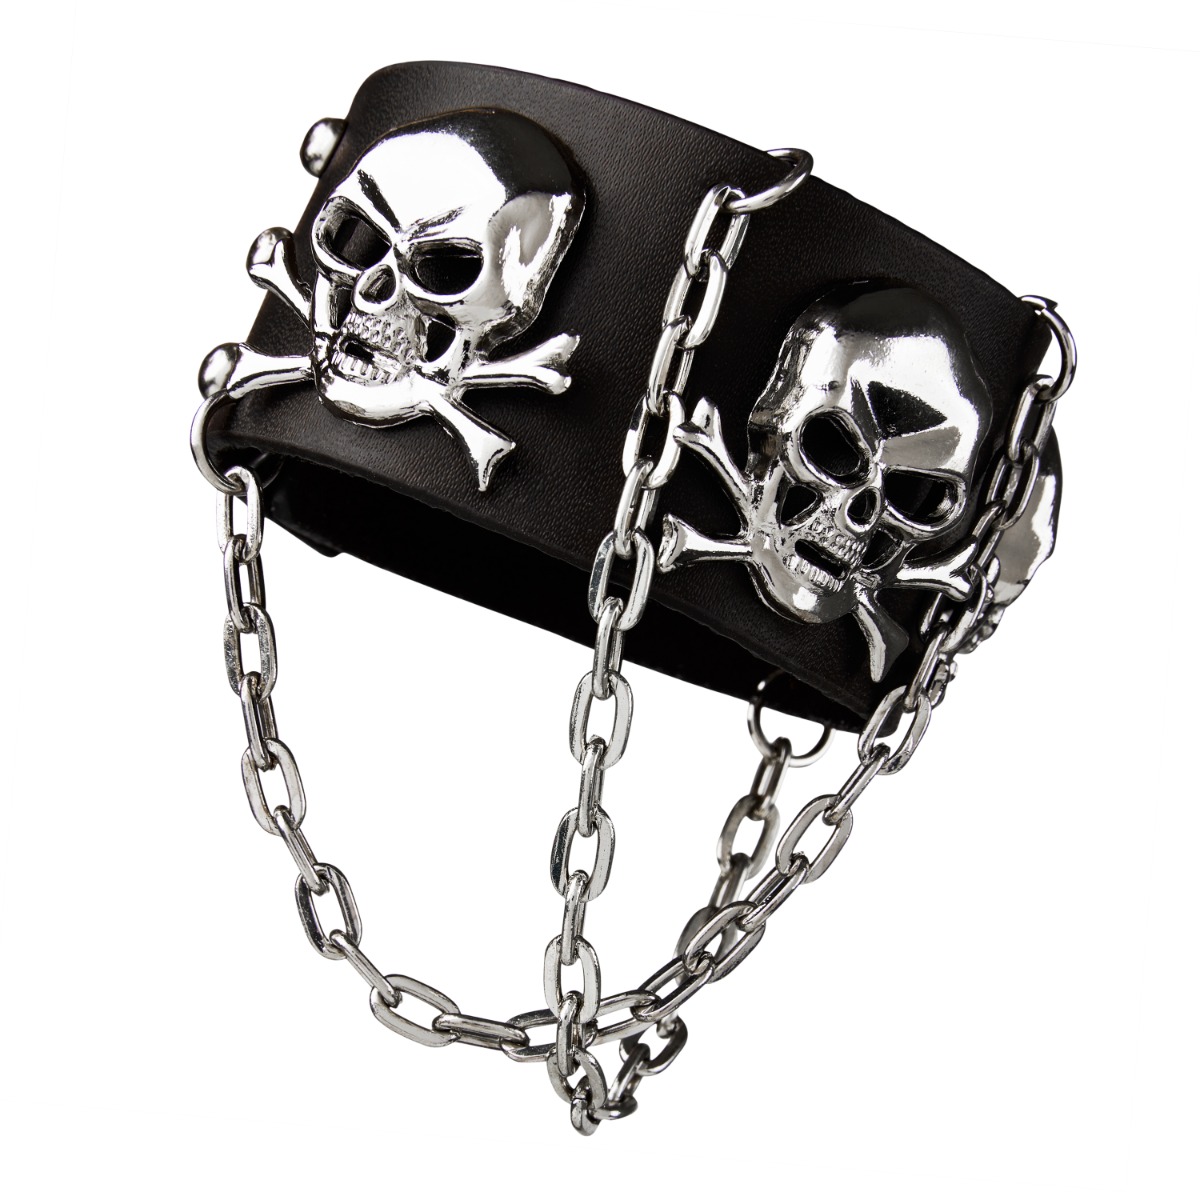 Leather Gothic Accessories, Emo Accessories Bracelet